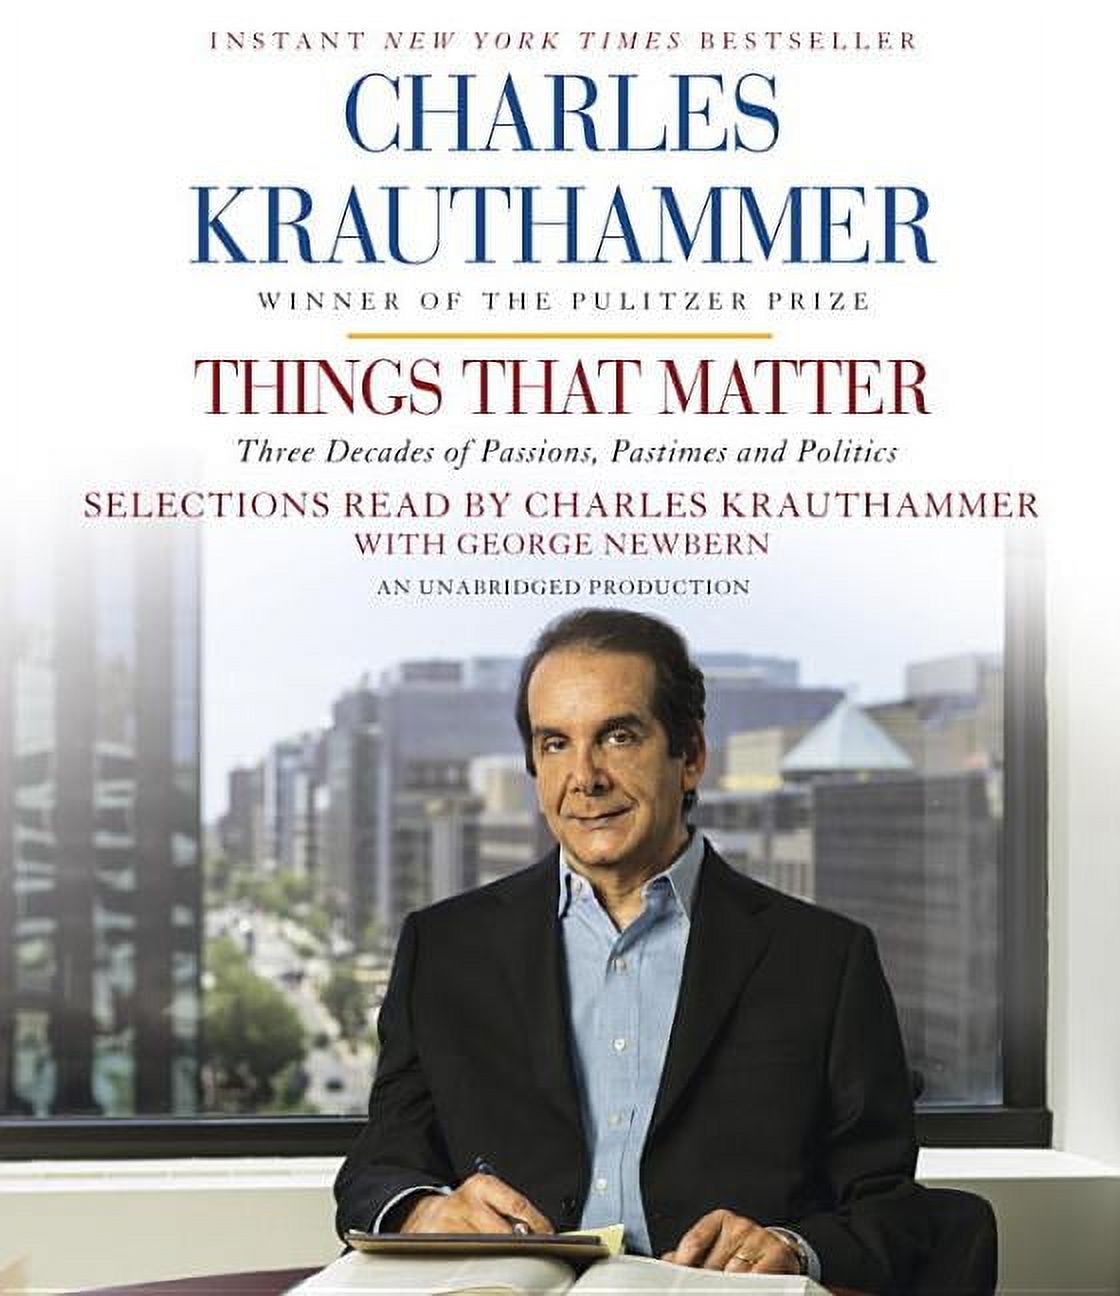 Things That Matter: Three Decades of Passions, Pastimes and Politics (Audiobook) by Charles Krauthammer, Charles Krauthammer, George Newbern - image 1 of 1